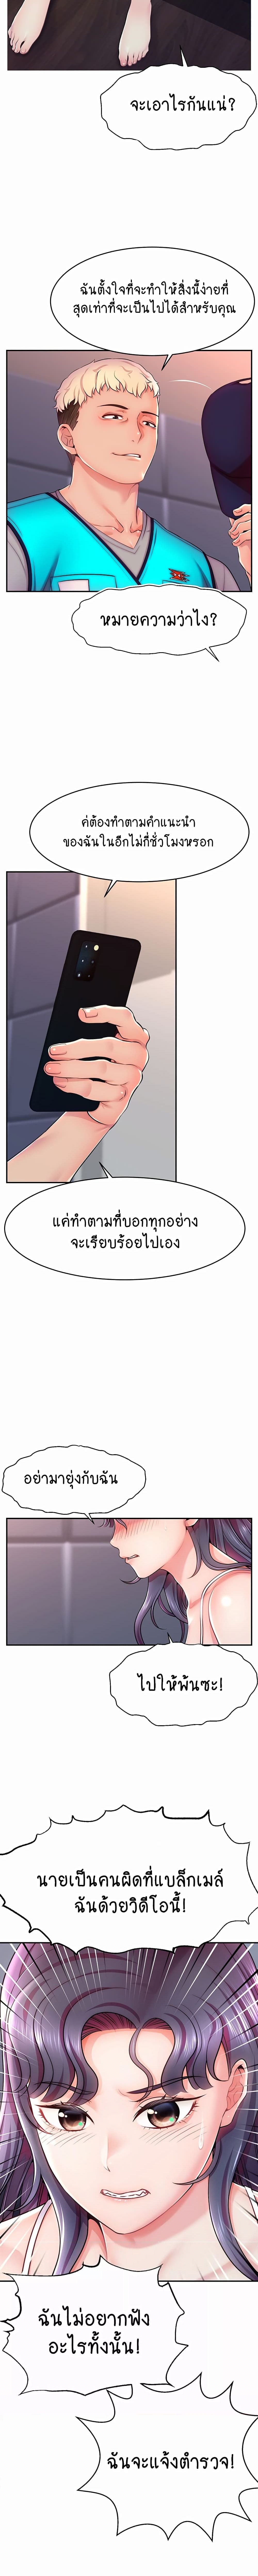 Making Friends With Streamers by Hacking! ตอนที่ 1 ภาพ 23